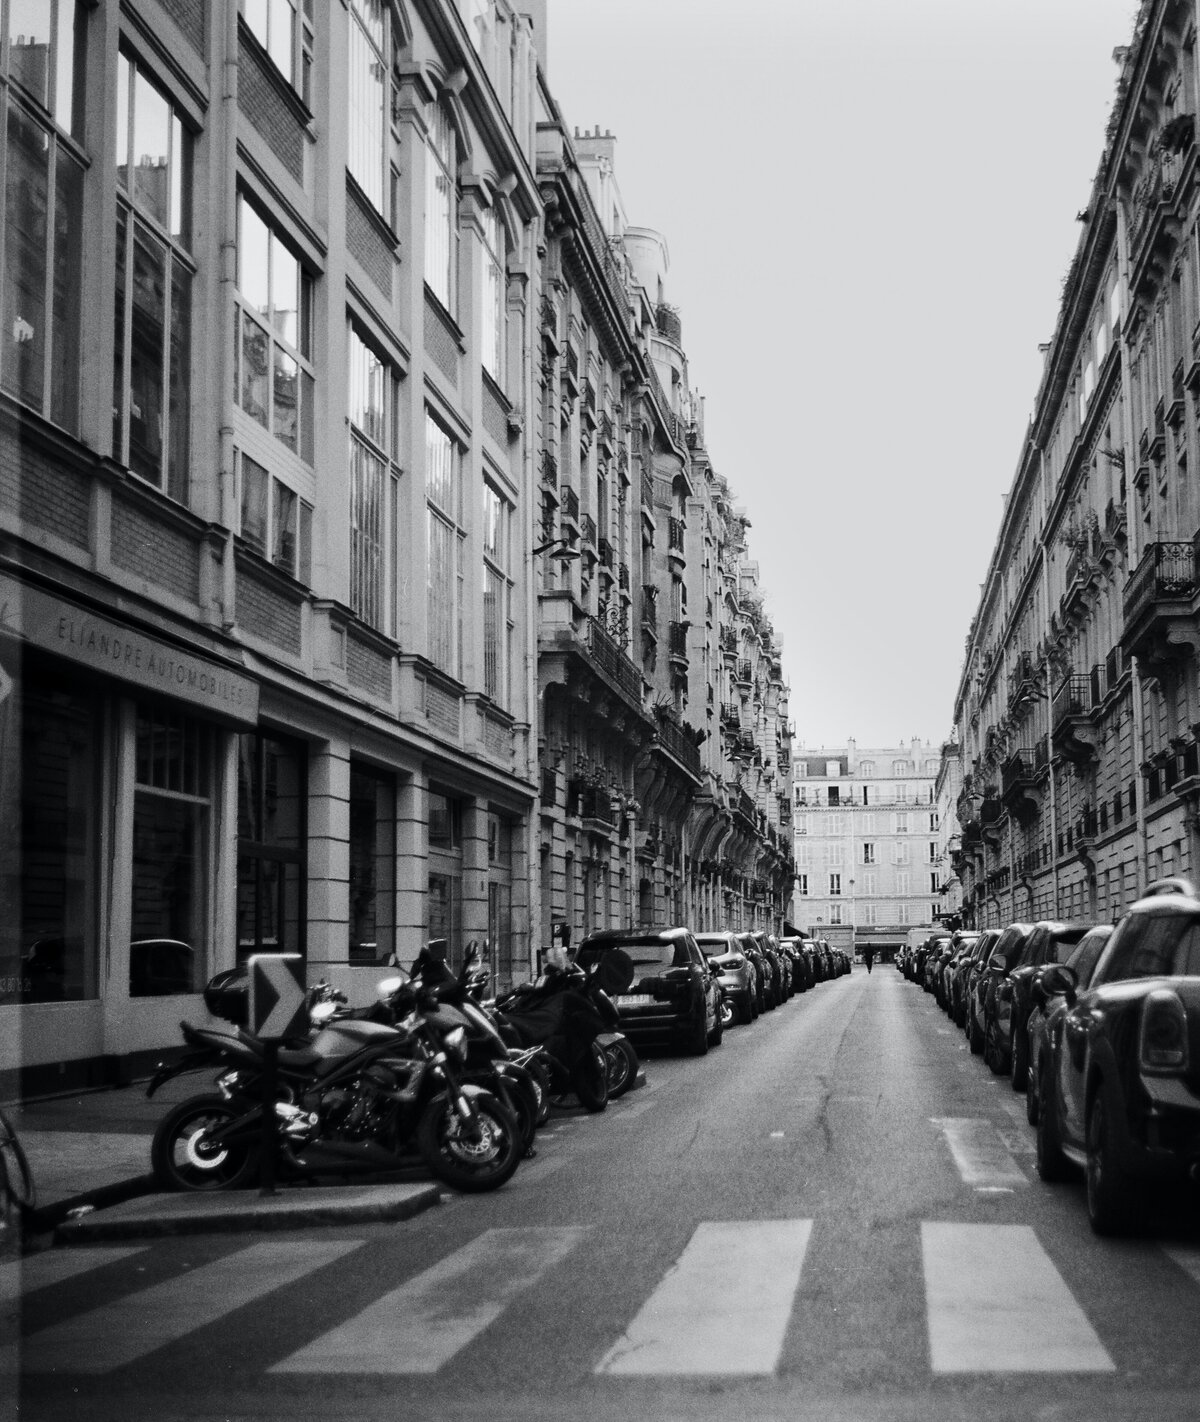 black and white image of cars parked on a street in europe